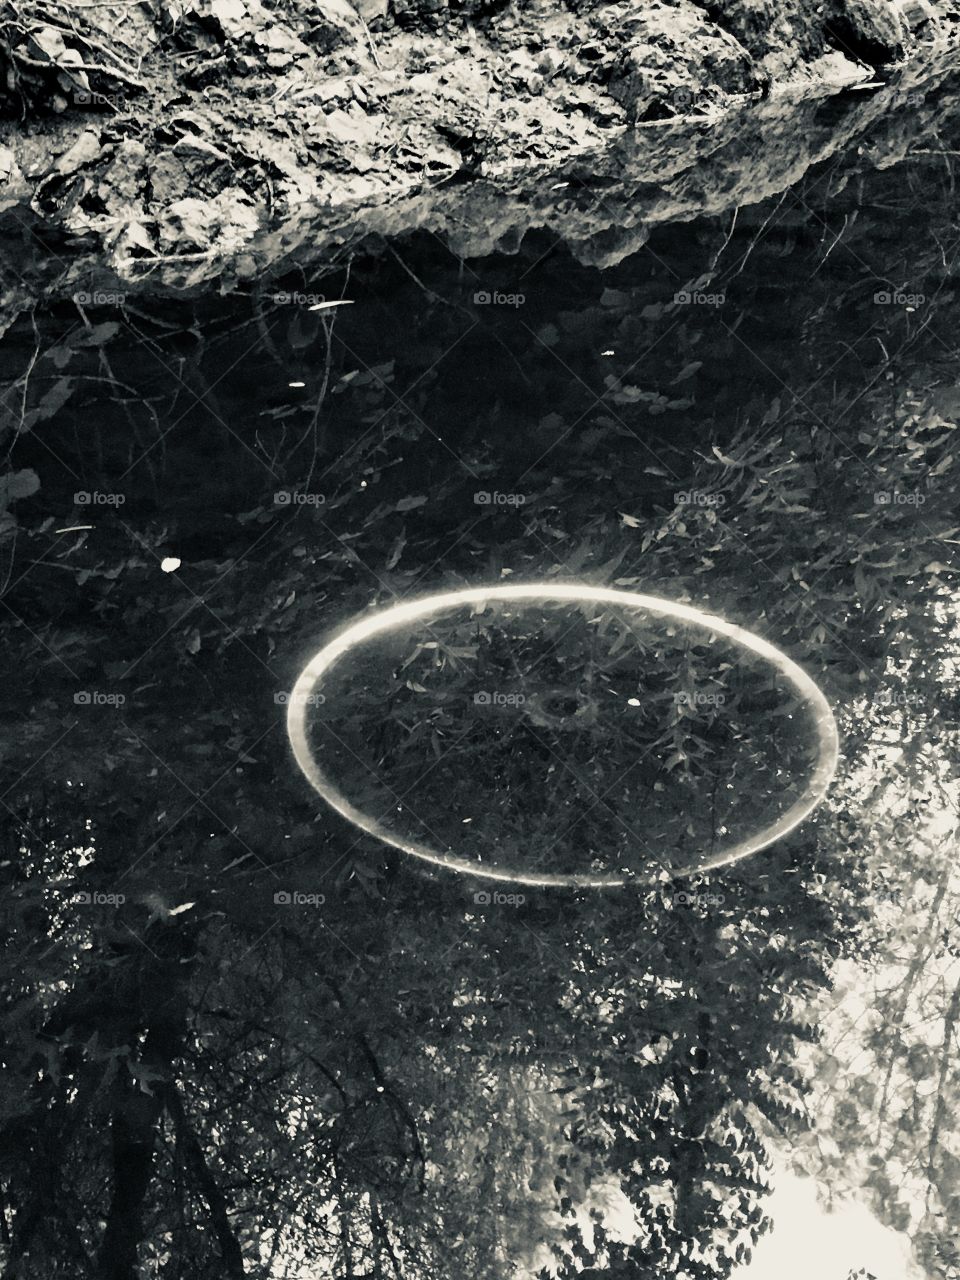 Litter, a bicycle wheel under a stagnant pond 